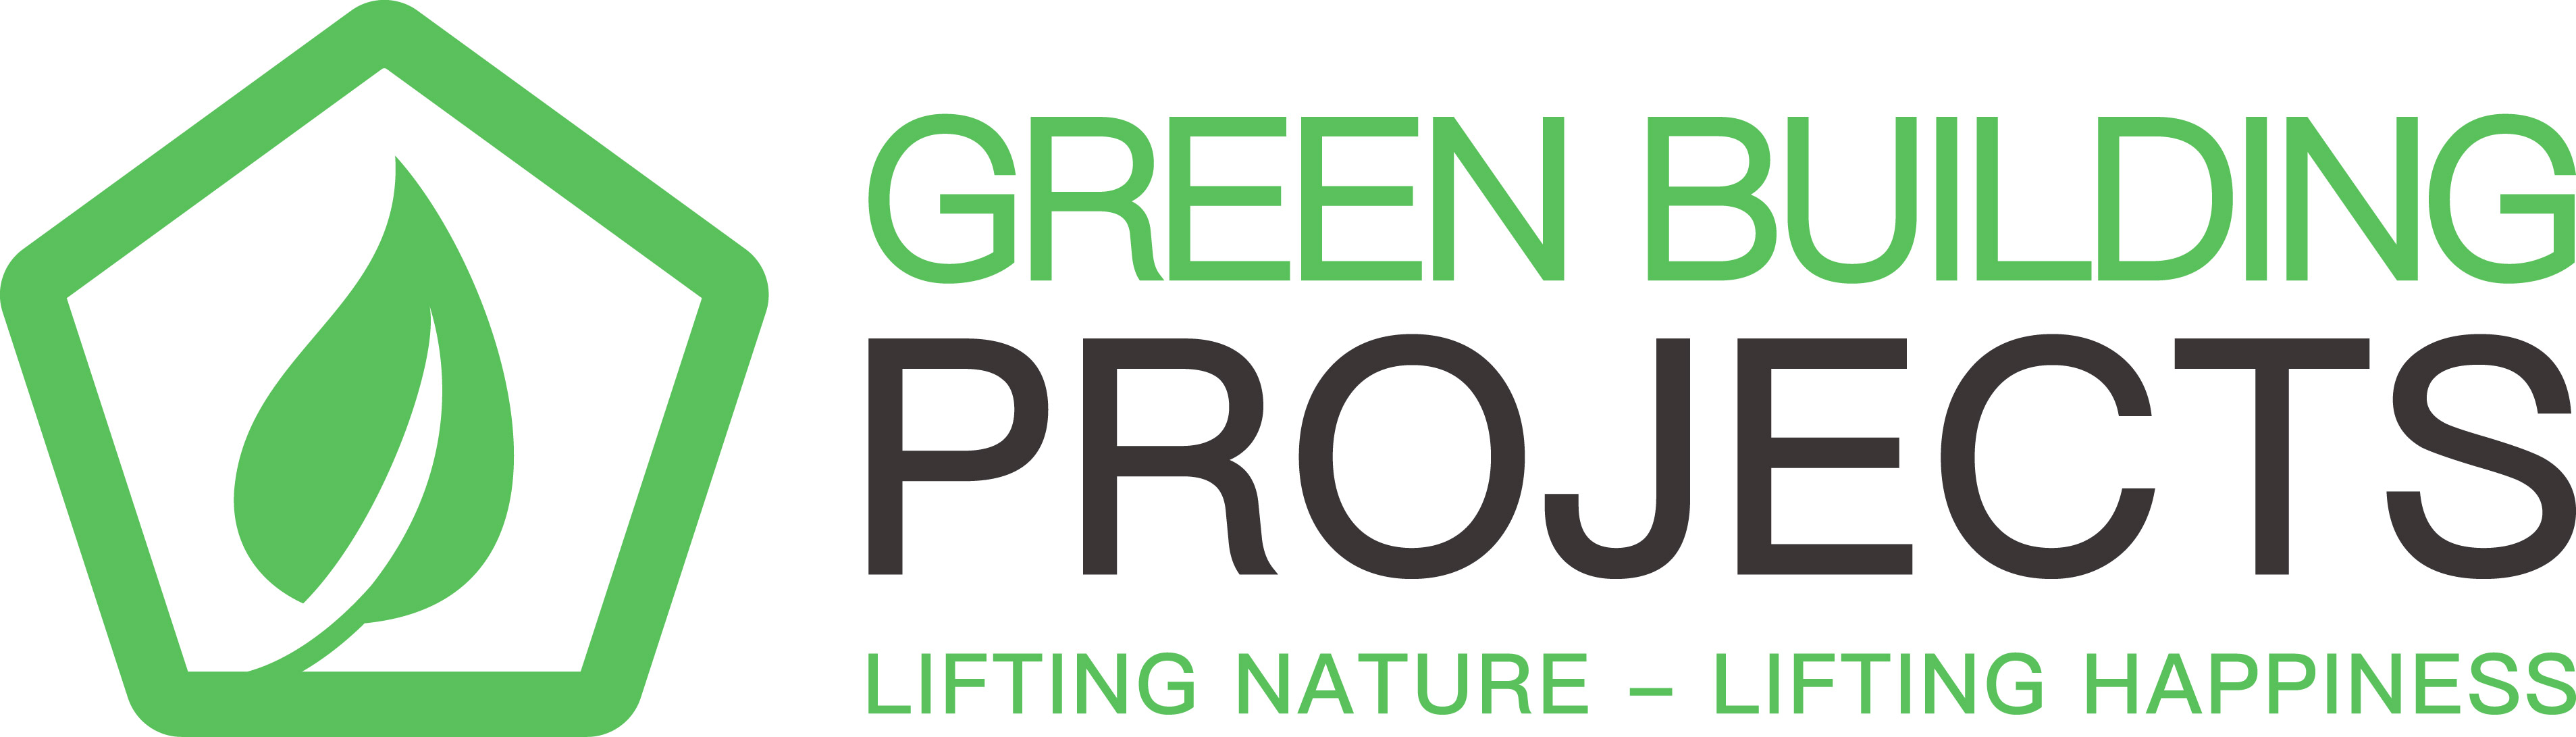 Green Building Projects